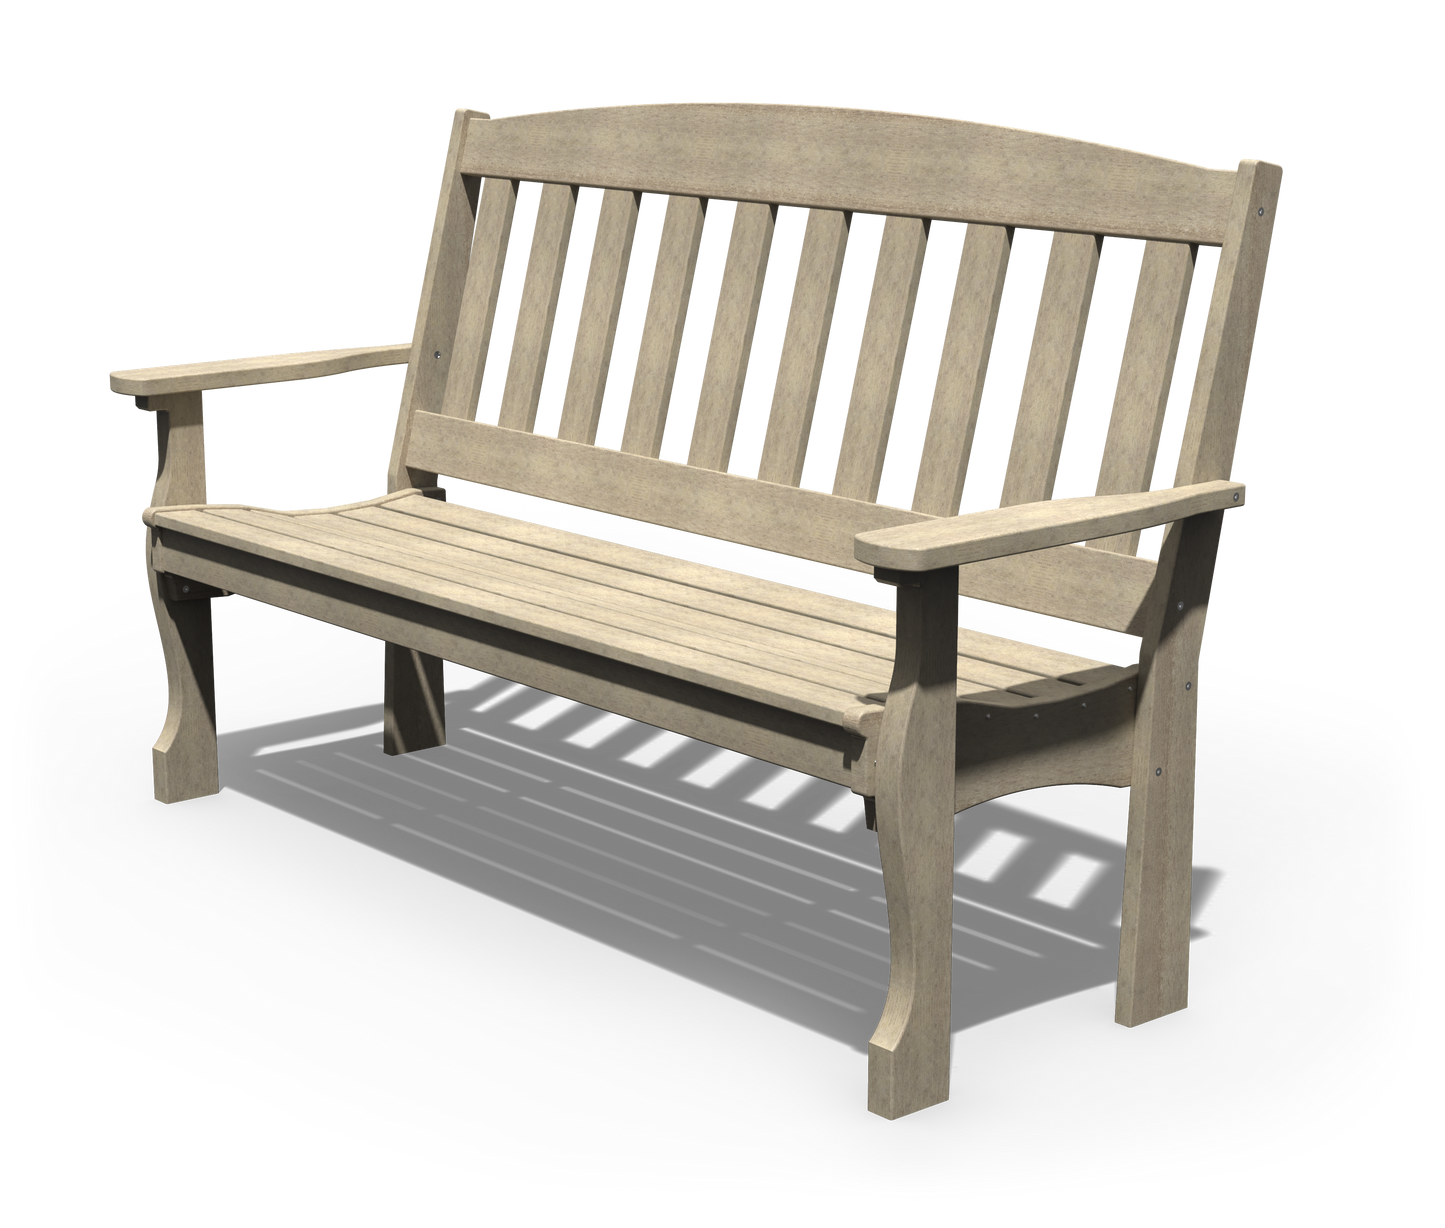 Patiova Recycled Plastic 5′ English Garden Bench - LEAD TIME TO SHIP 3 WEEKS